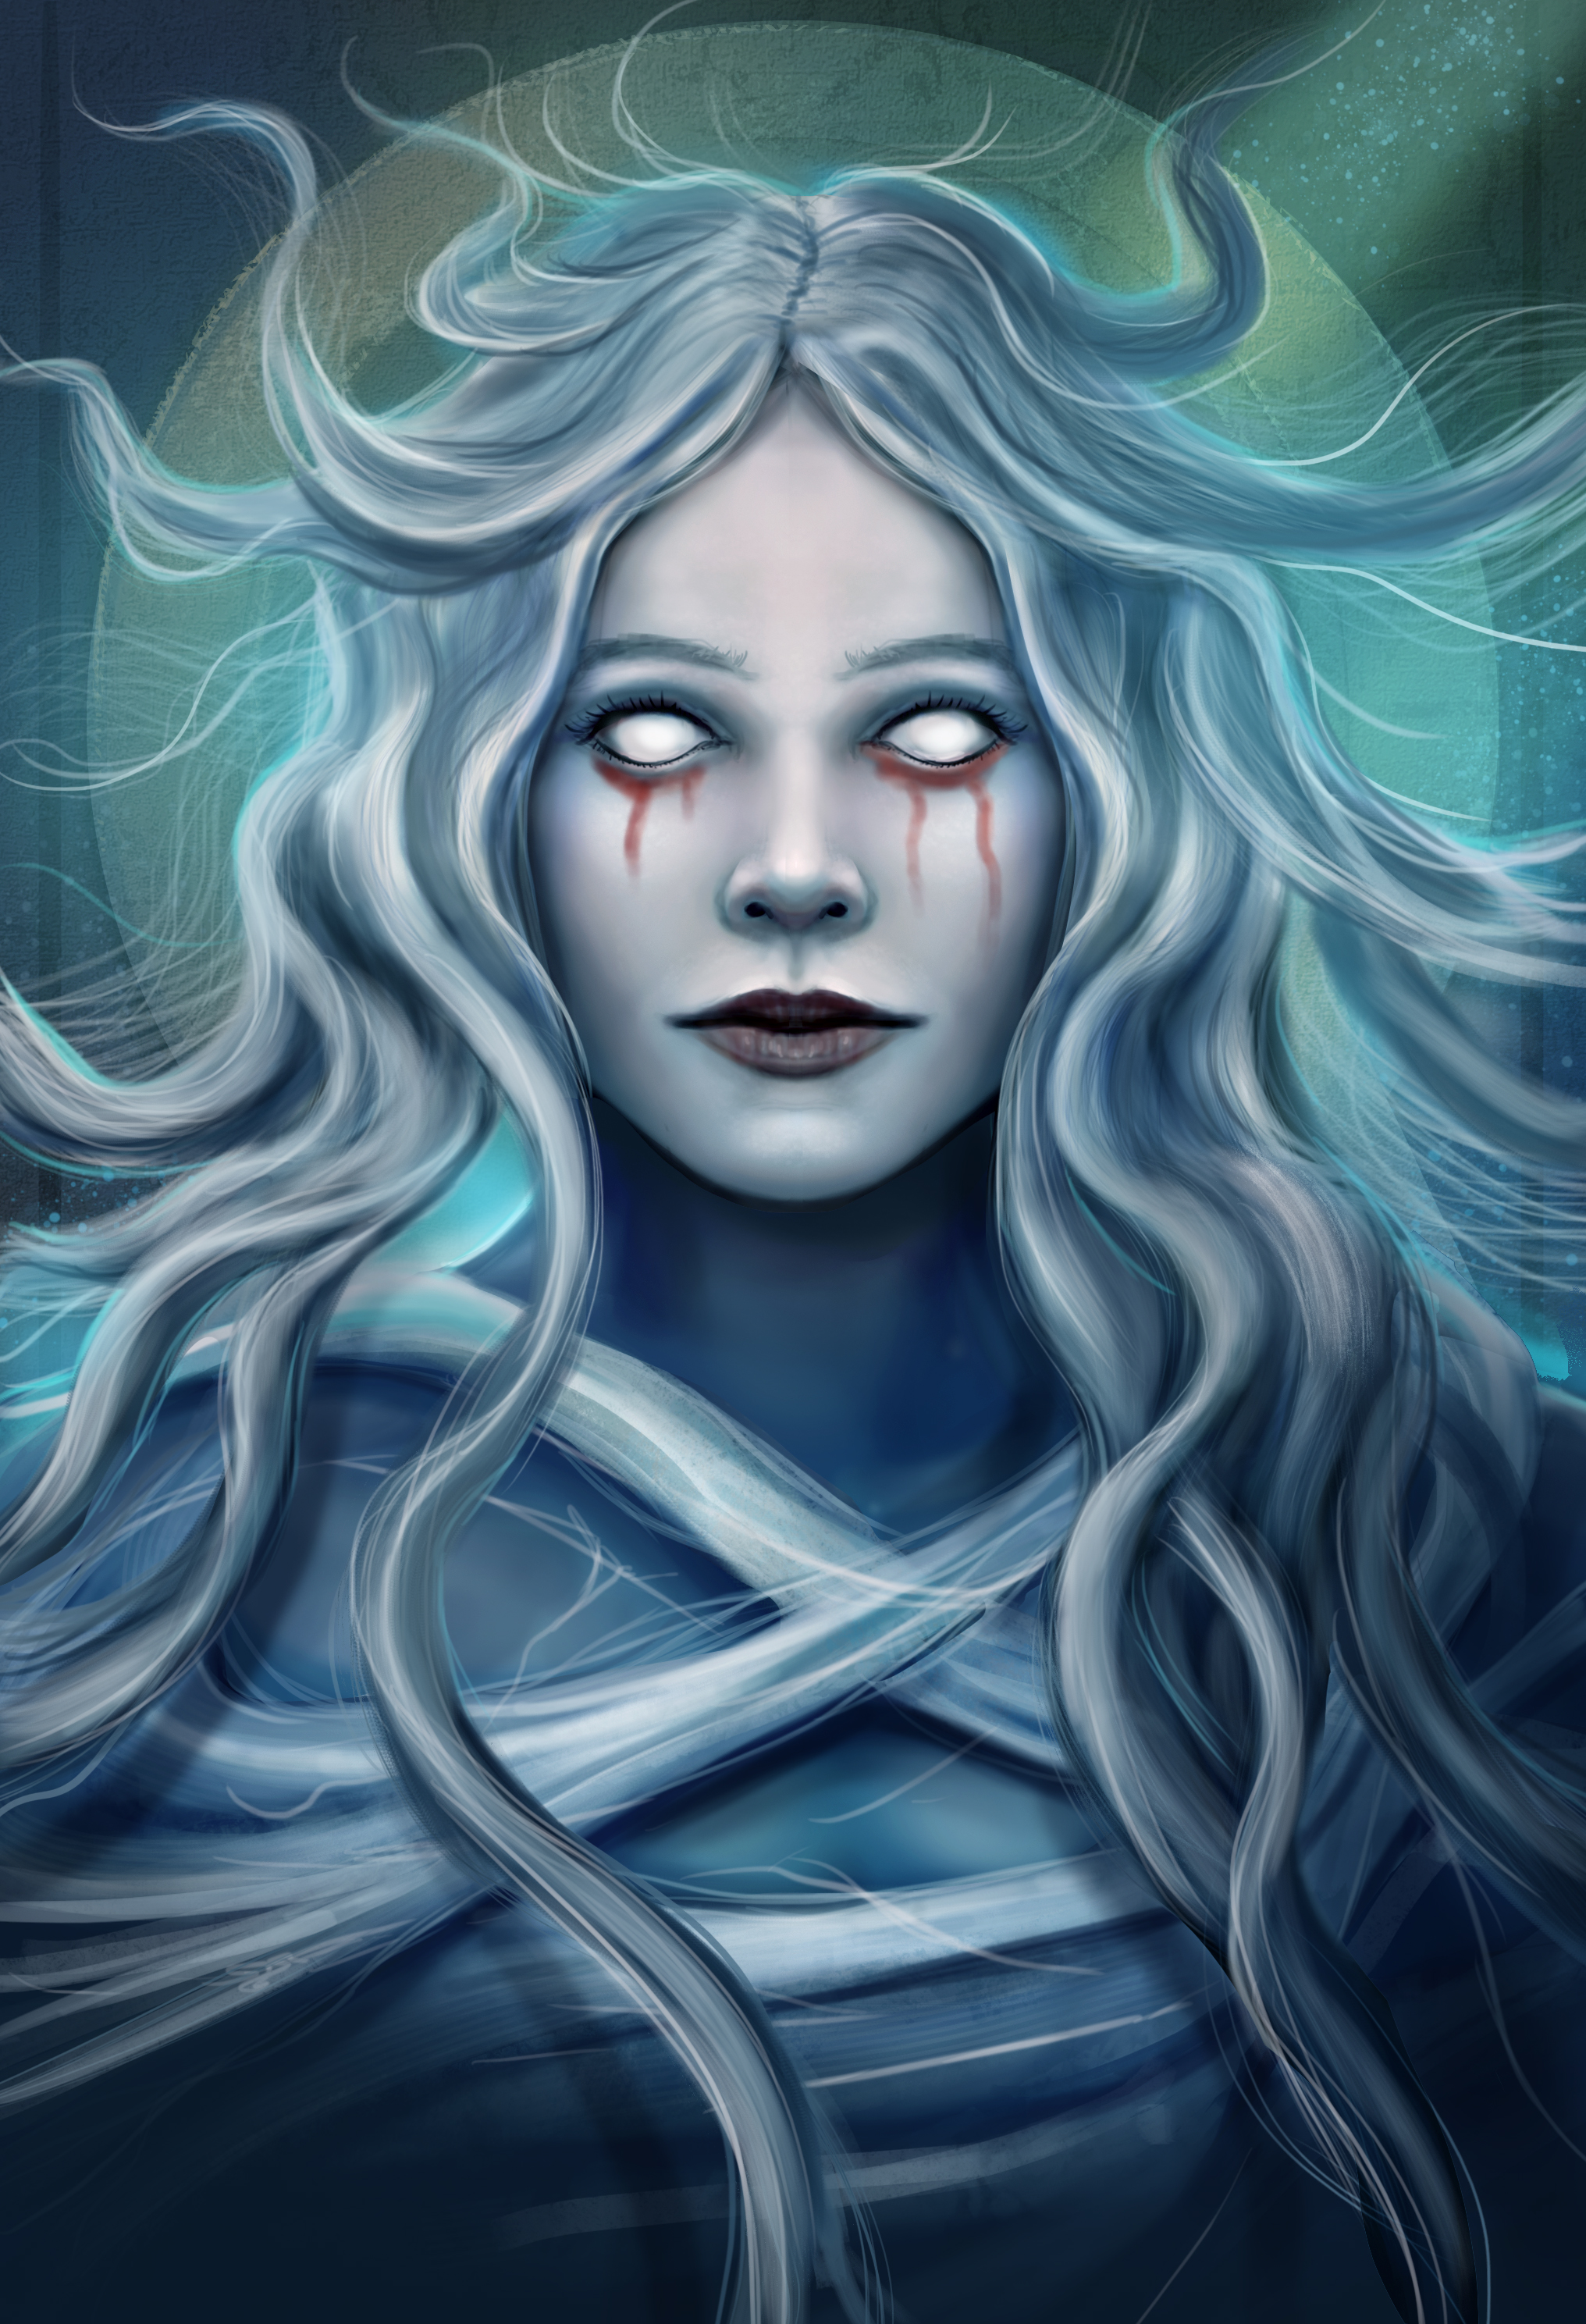 A banshee fantasy illustration for a board game, by The Noble Artist